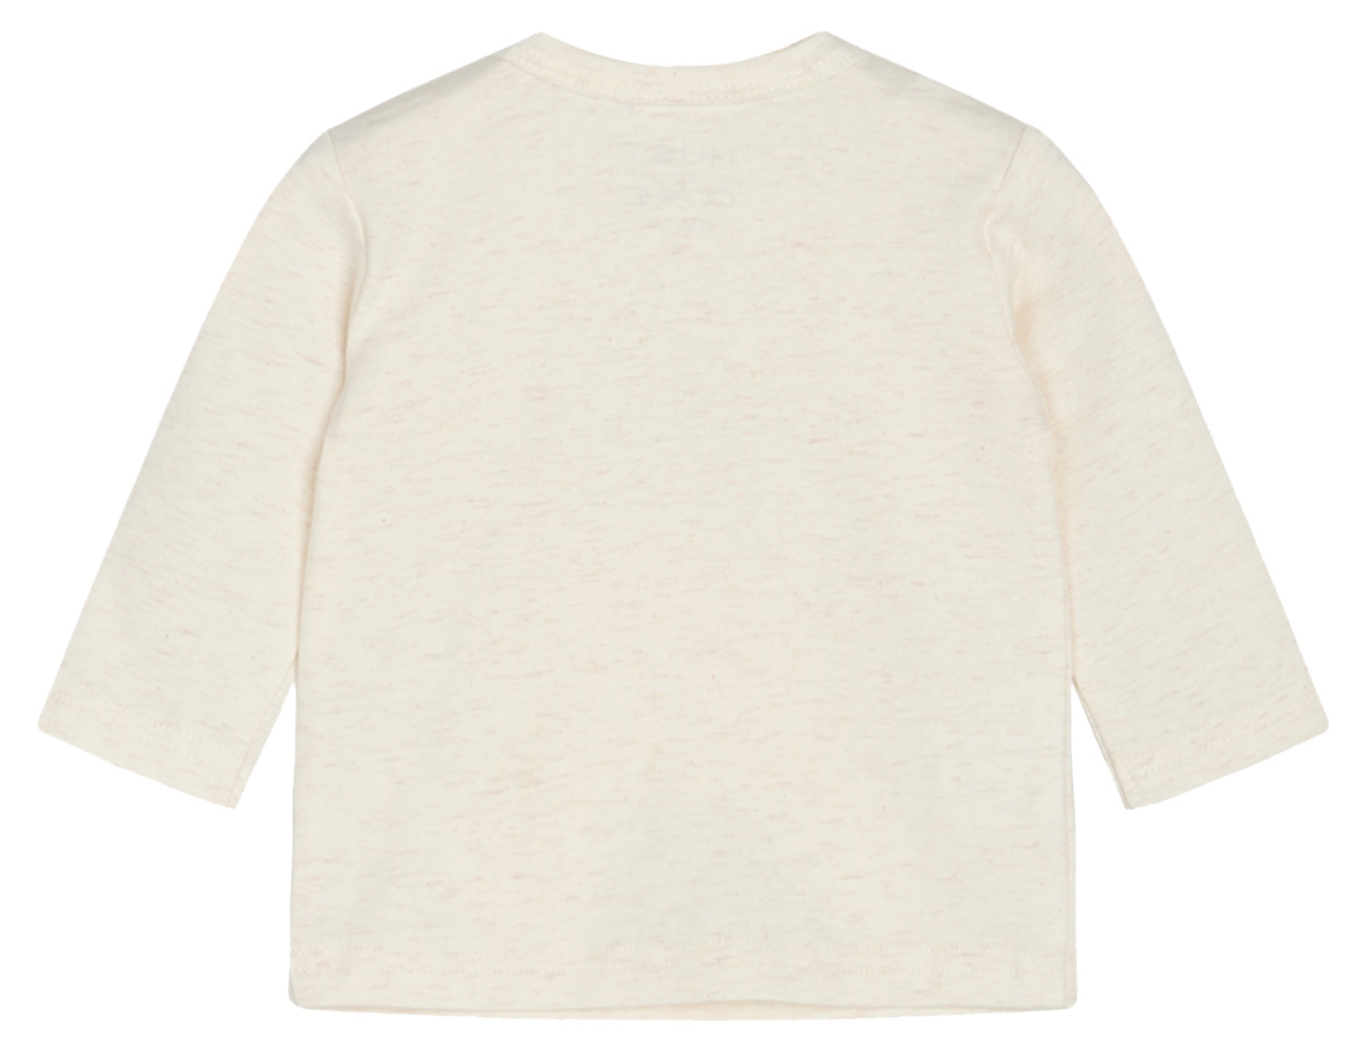 Hust & Claire Baby Langarmshirt Ente